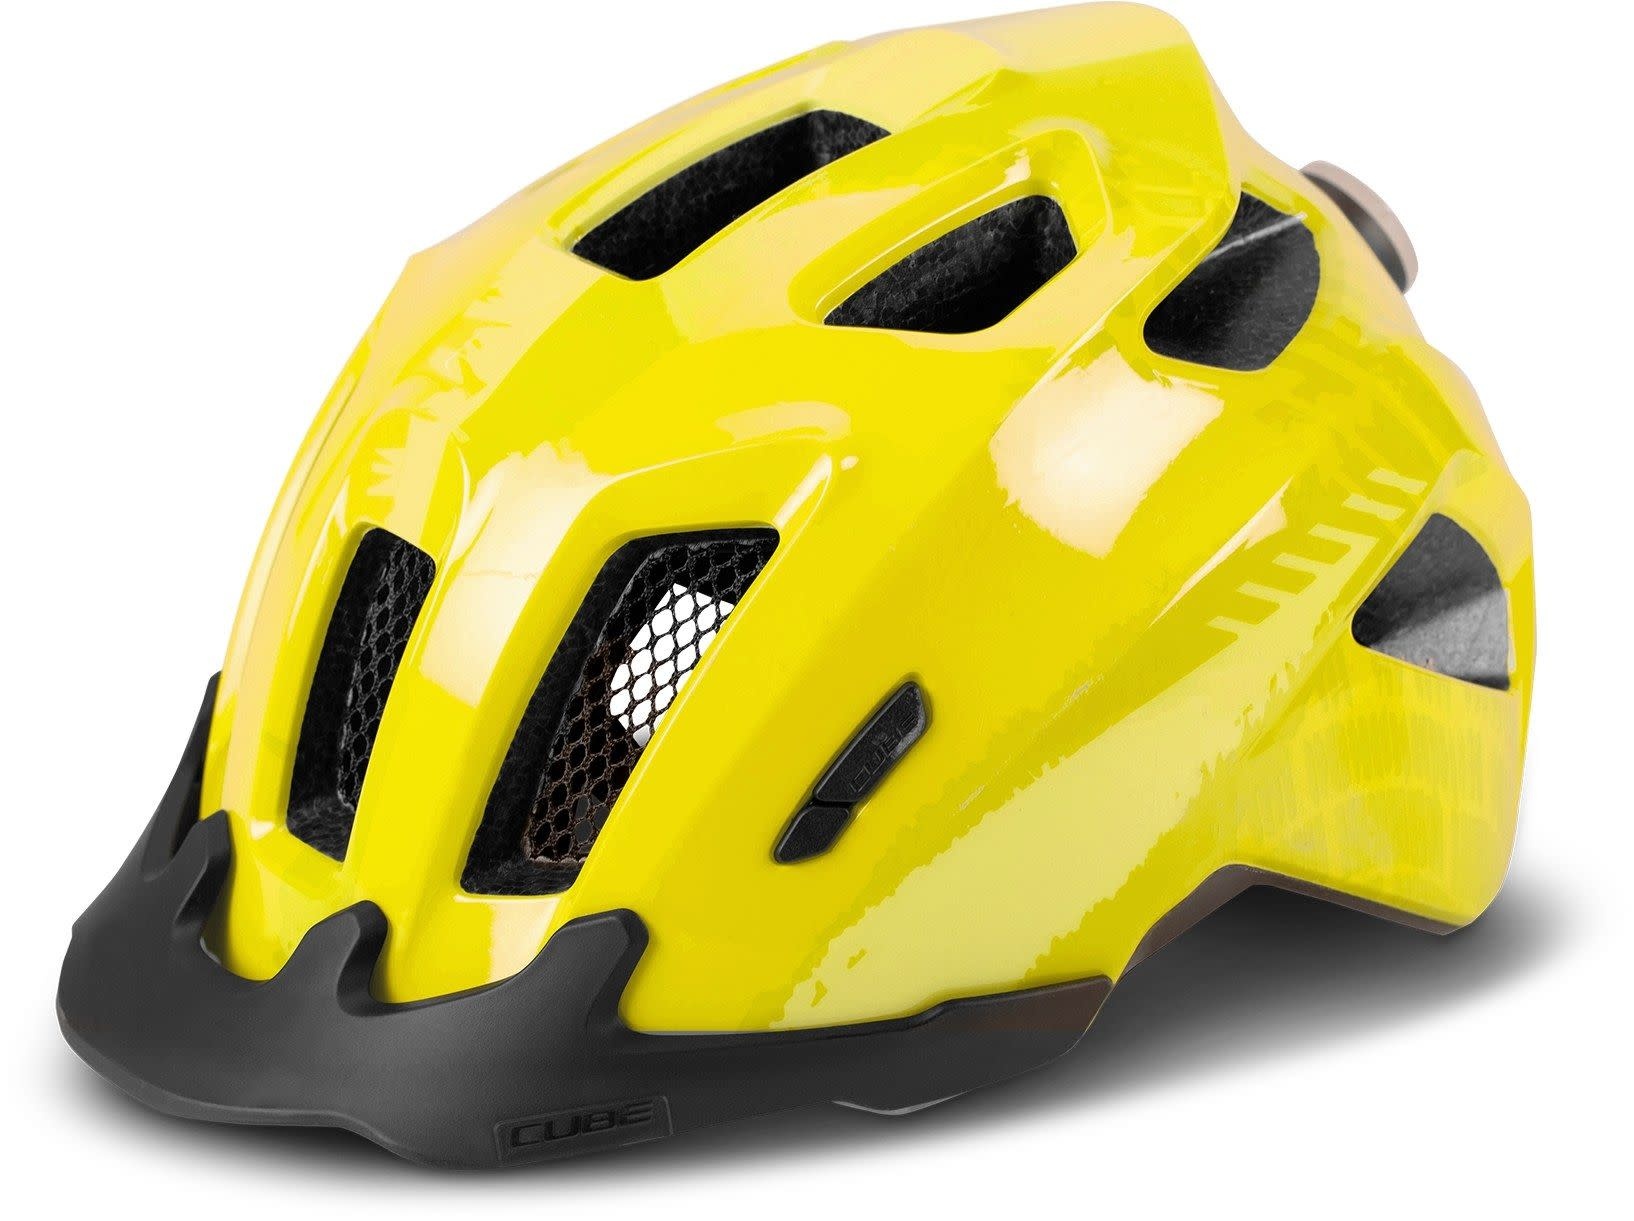 You added <b><u>Cube Ant Childs Helmet with Rear LED Light</u></b> to your cart.